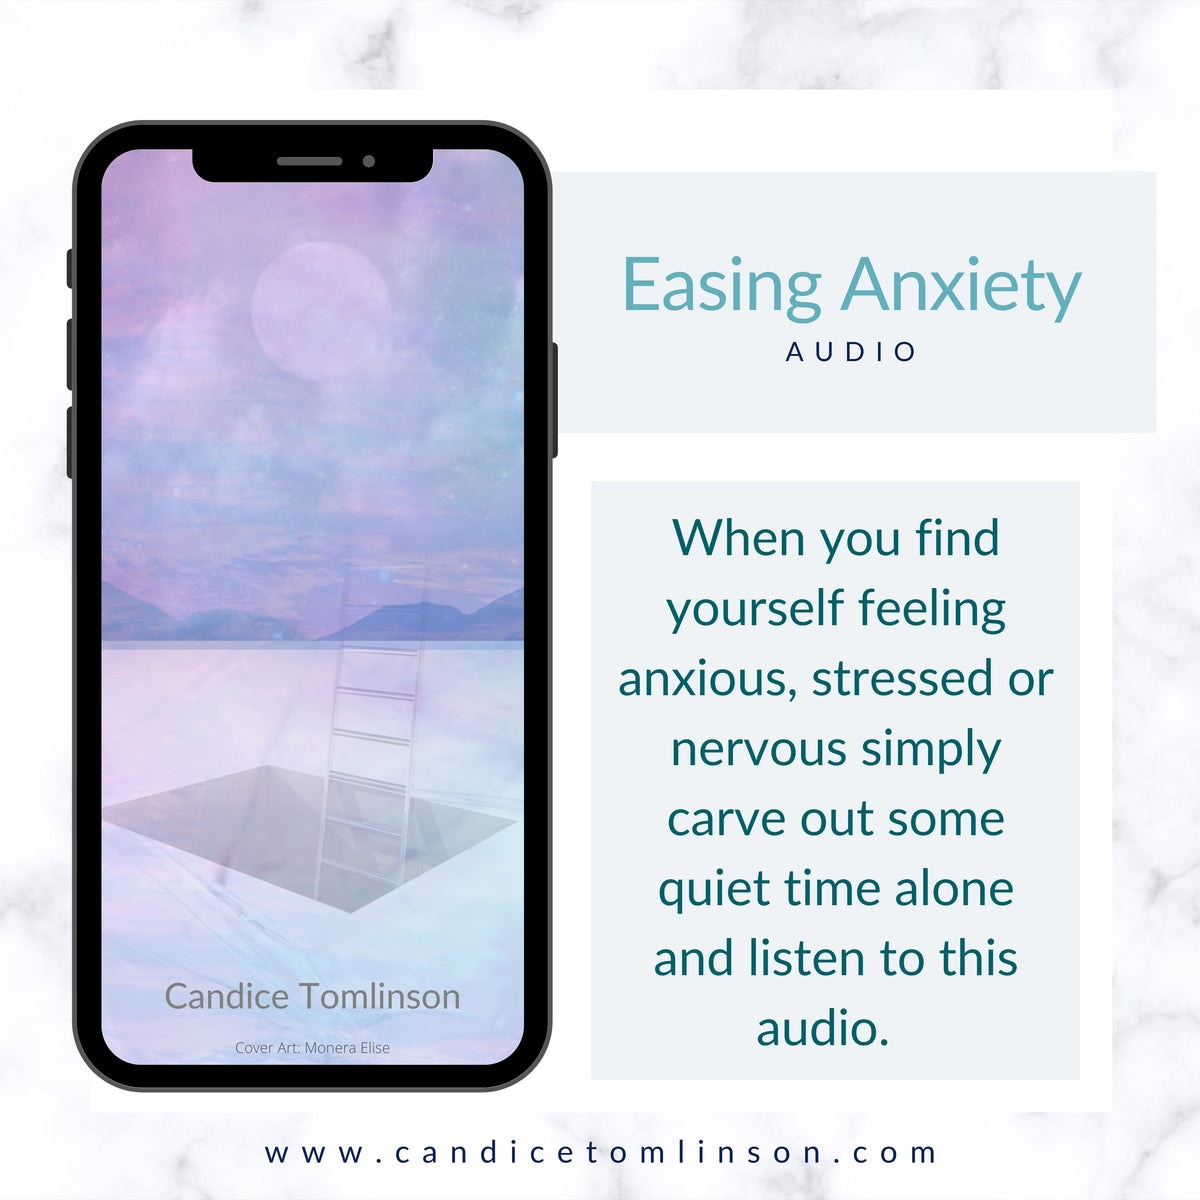 Easing Anxiety Audio